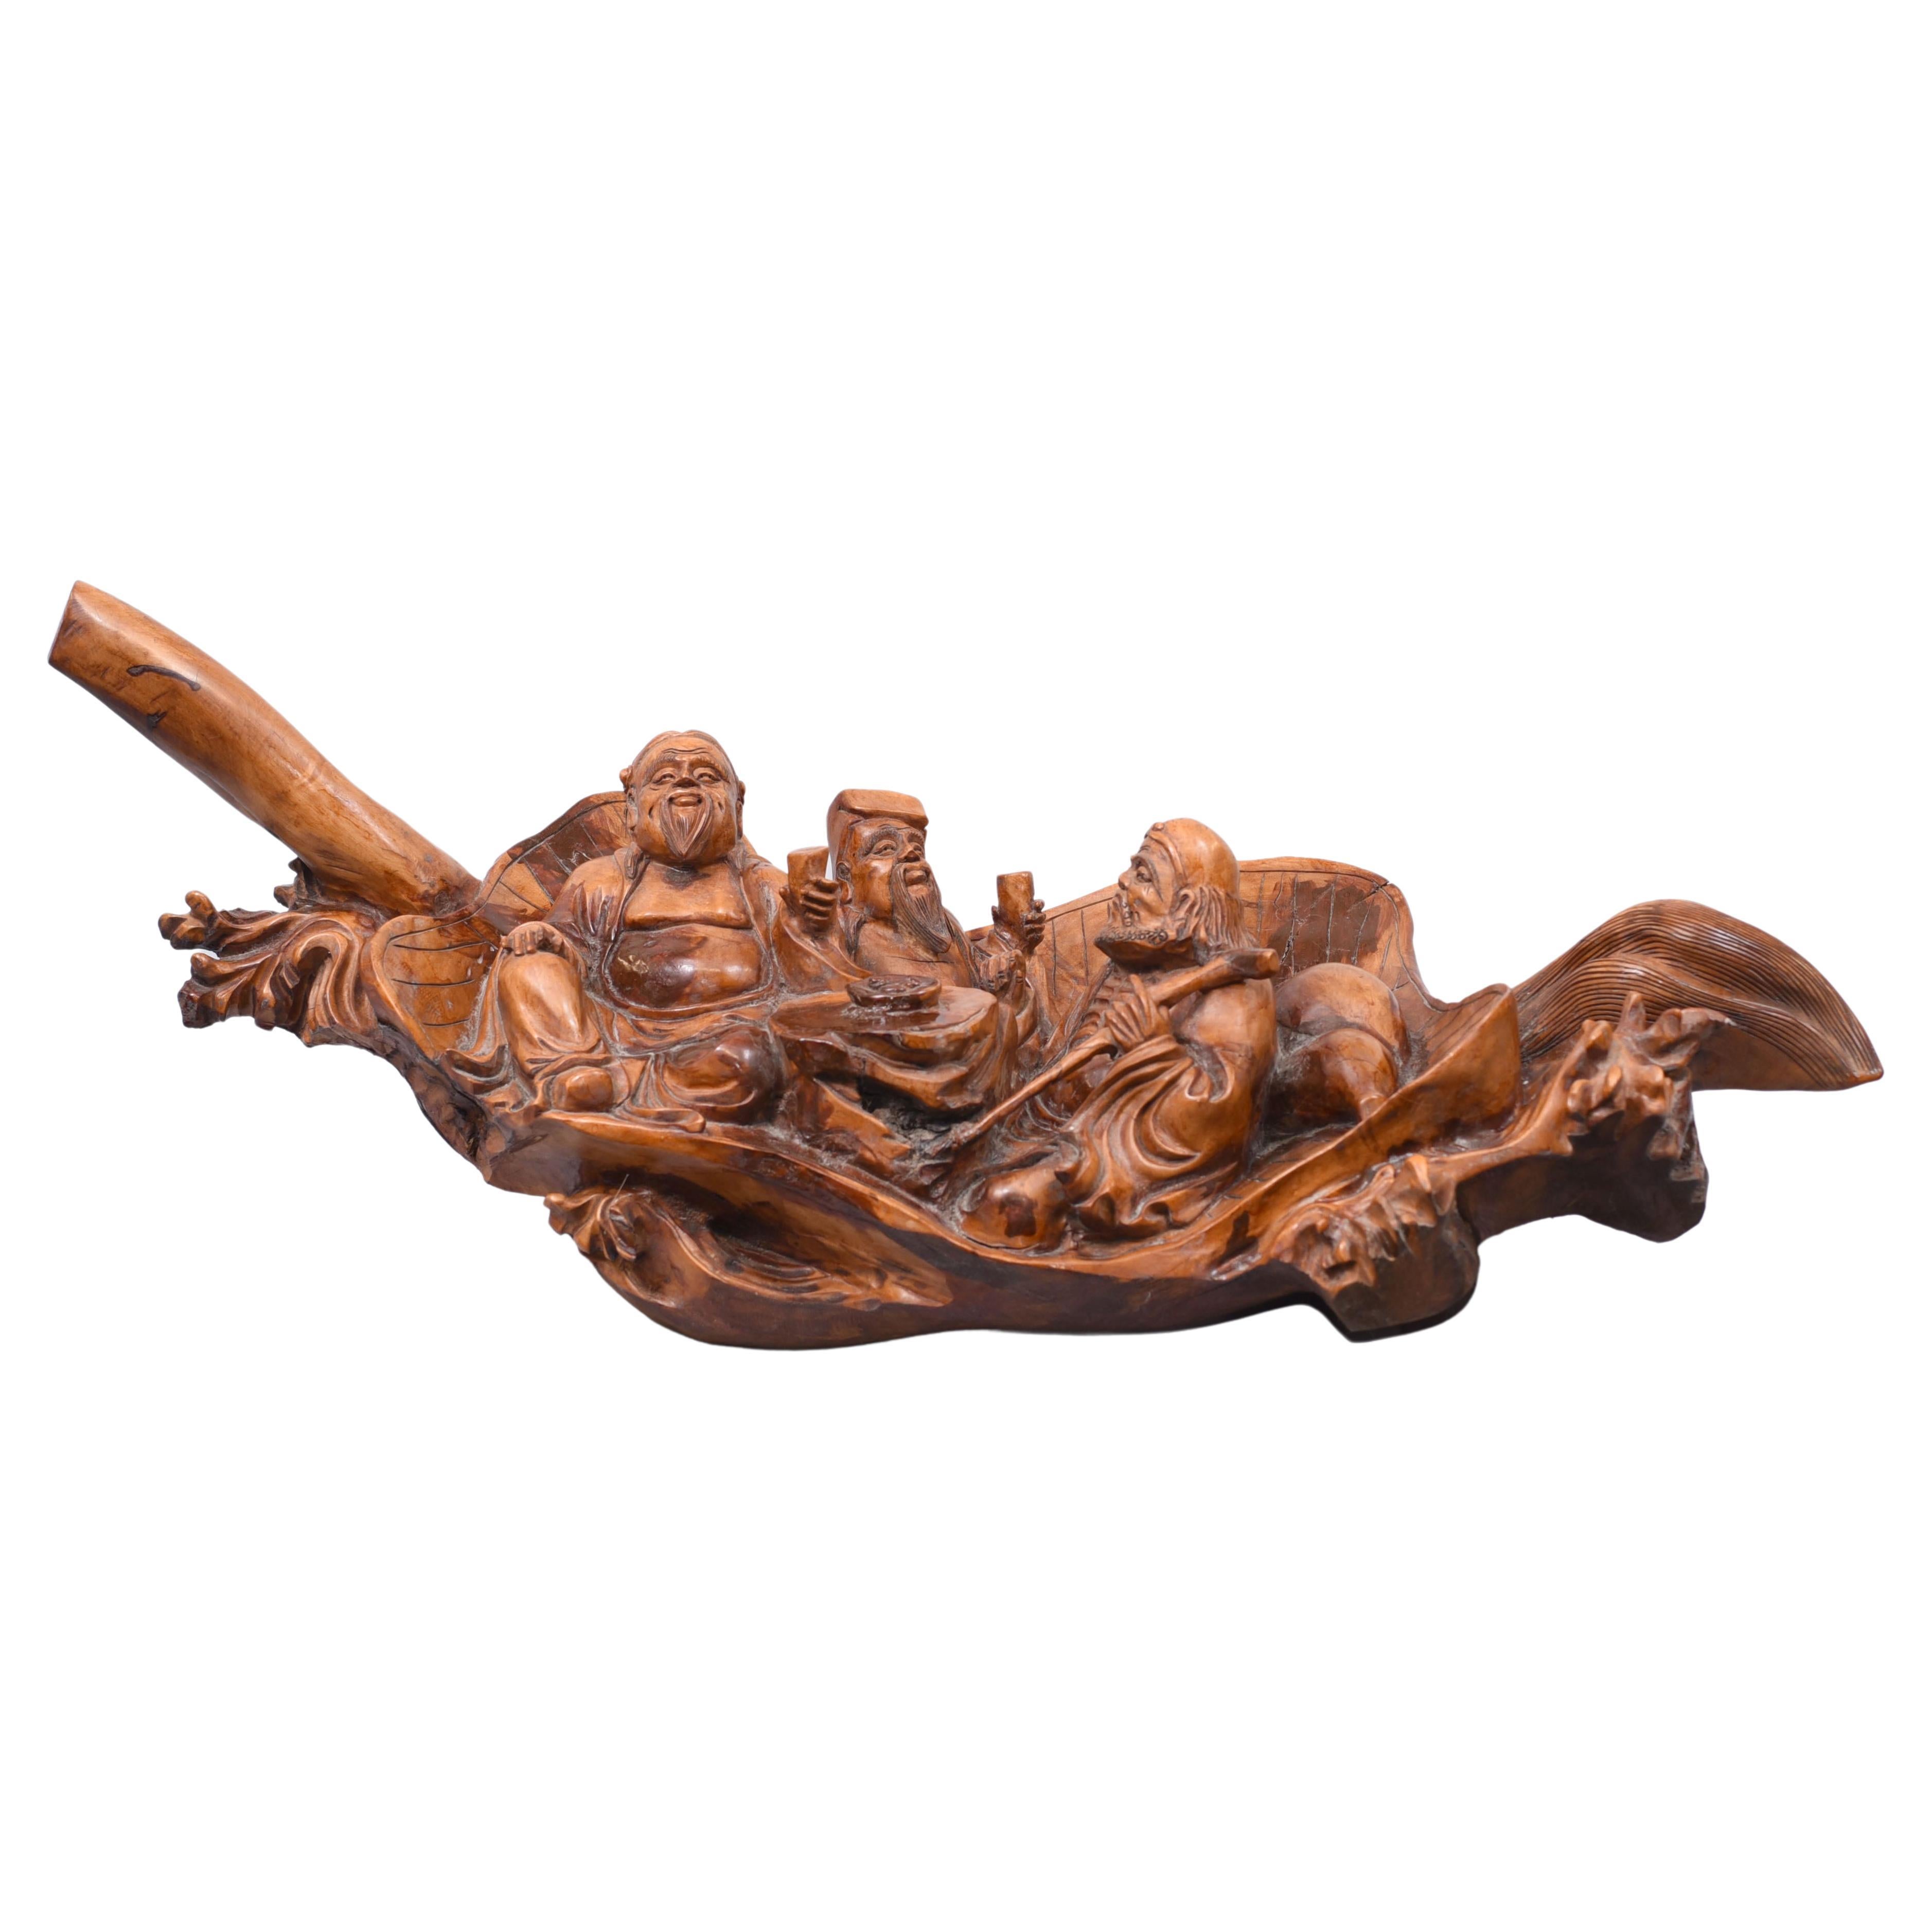 Carved Chinese Wise Men Statue Circa 1900, Hardwood Boat Figurine